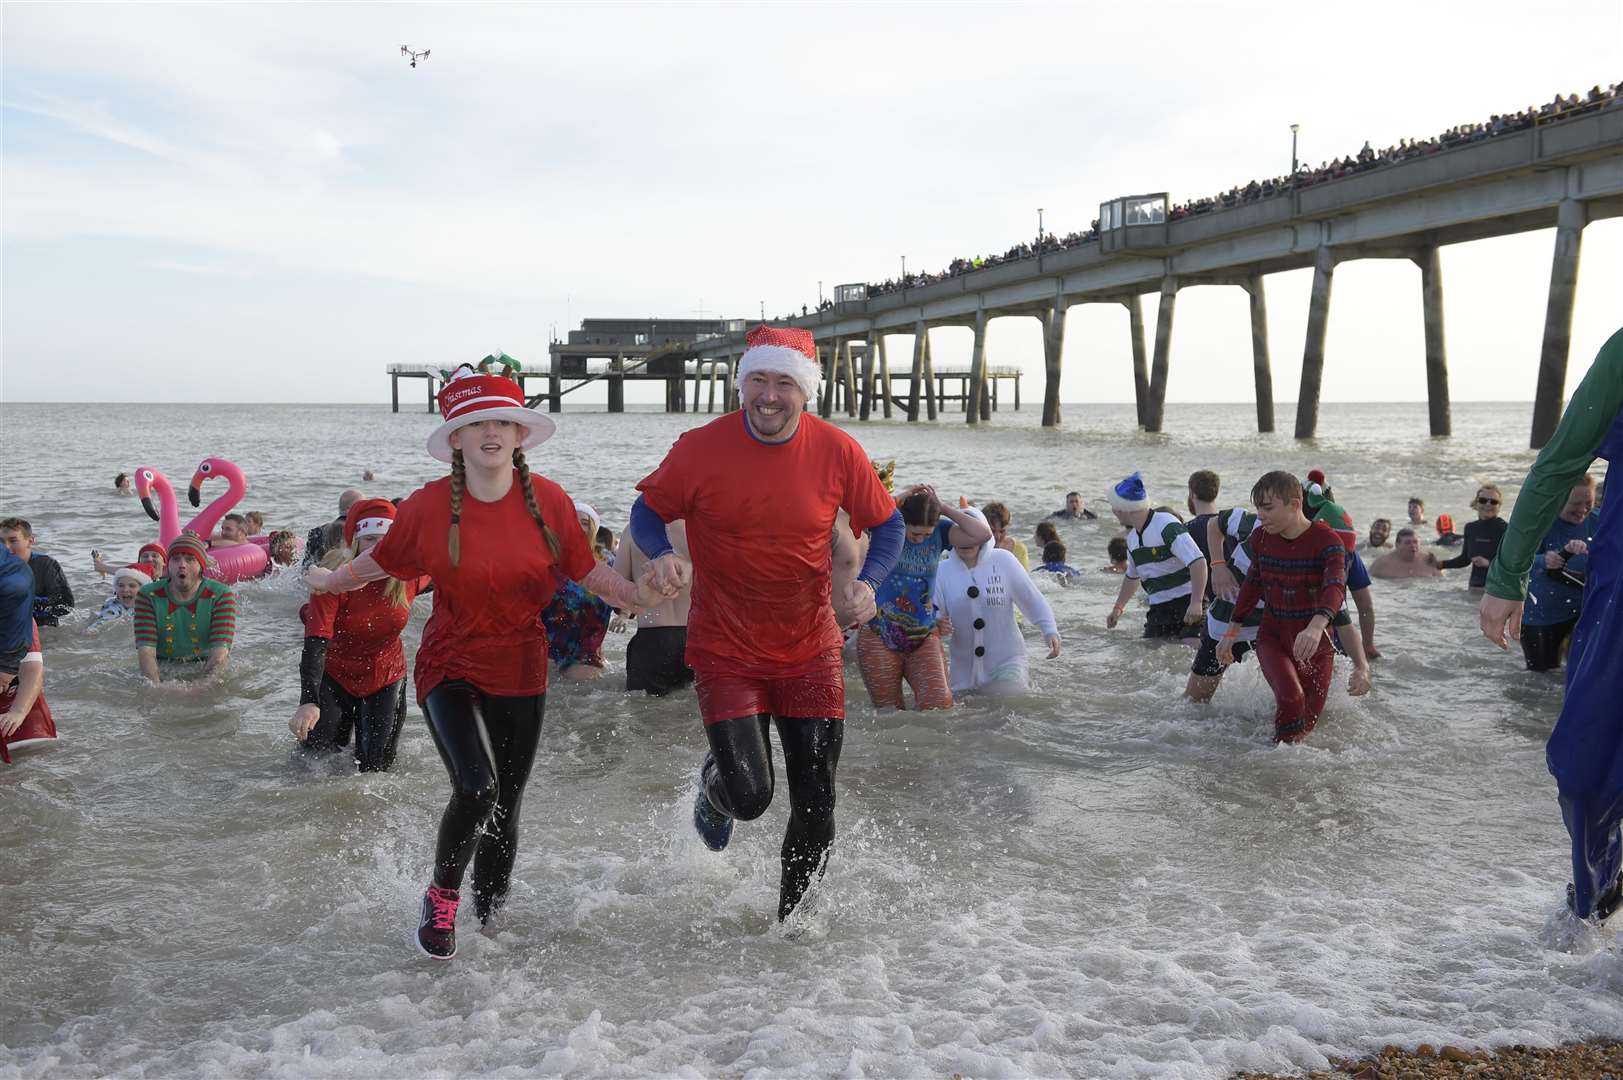 Huge crowds are expected as people dash into the chilly sea for charity